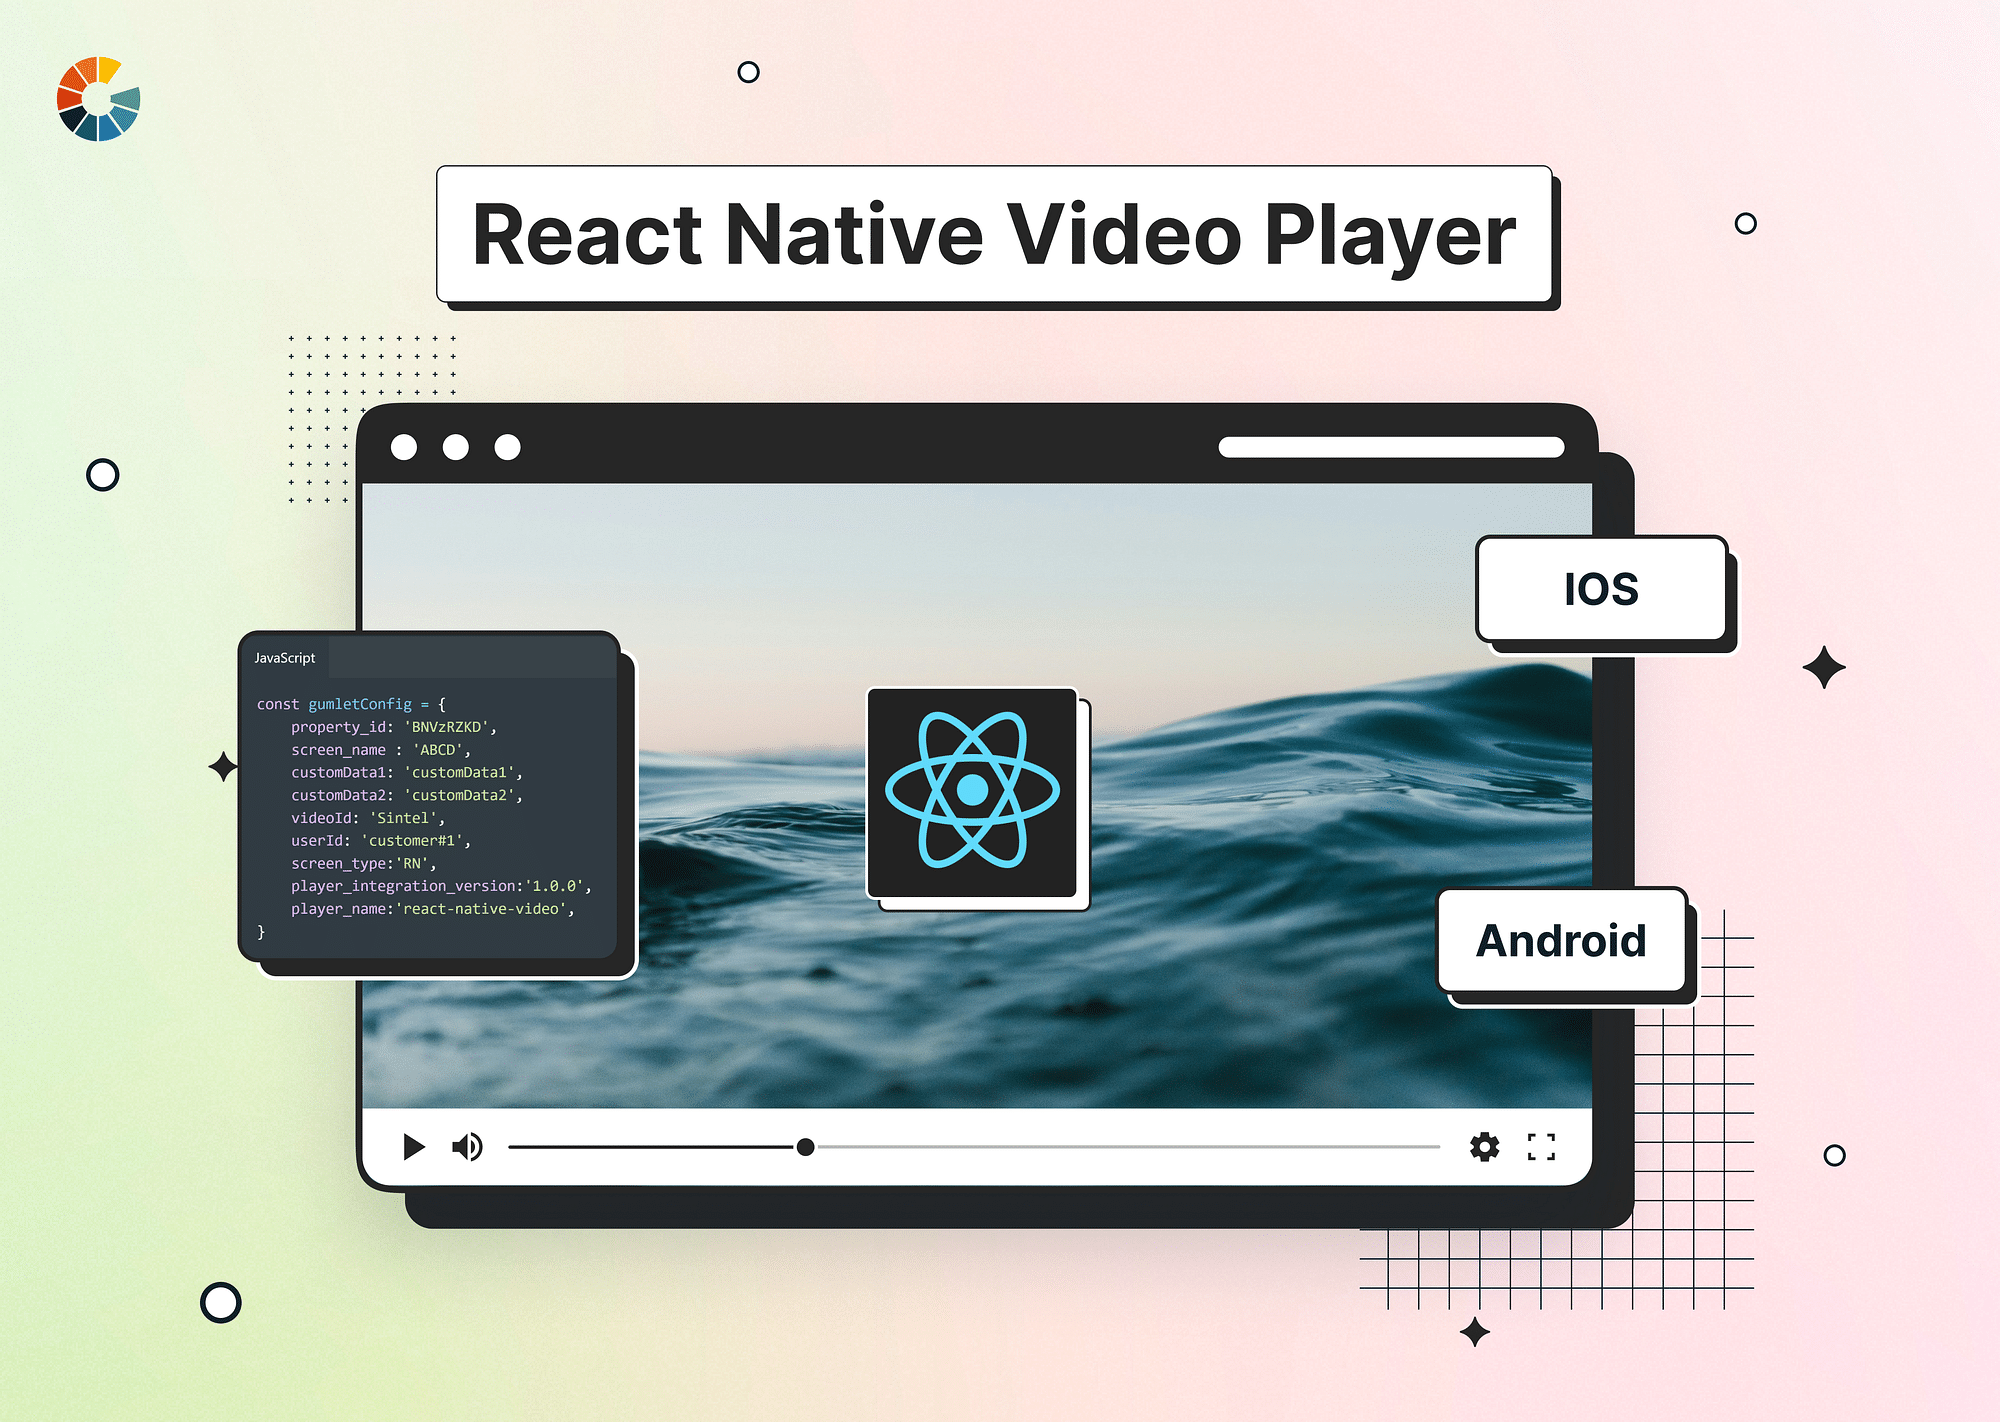 How to Implement a Video Player in React Native?